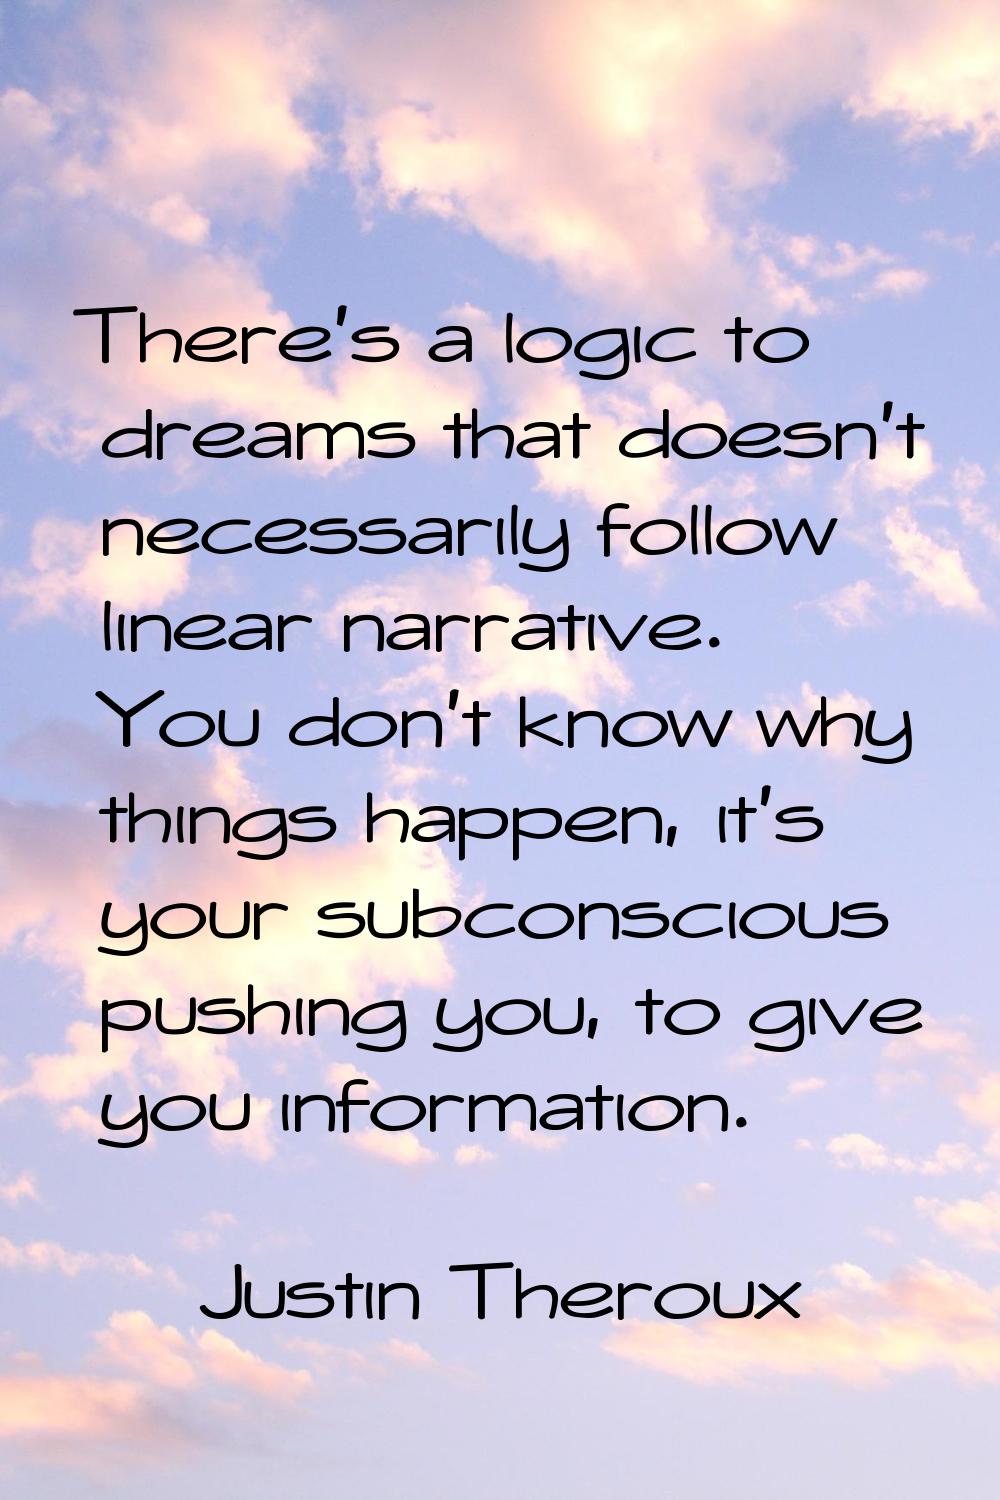 There's a logic to dreams that doesn't necessarily follow linear narrative. You don't know why thin